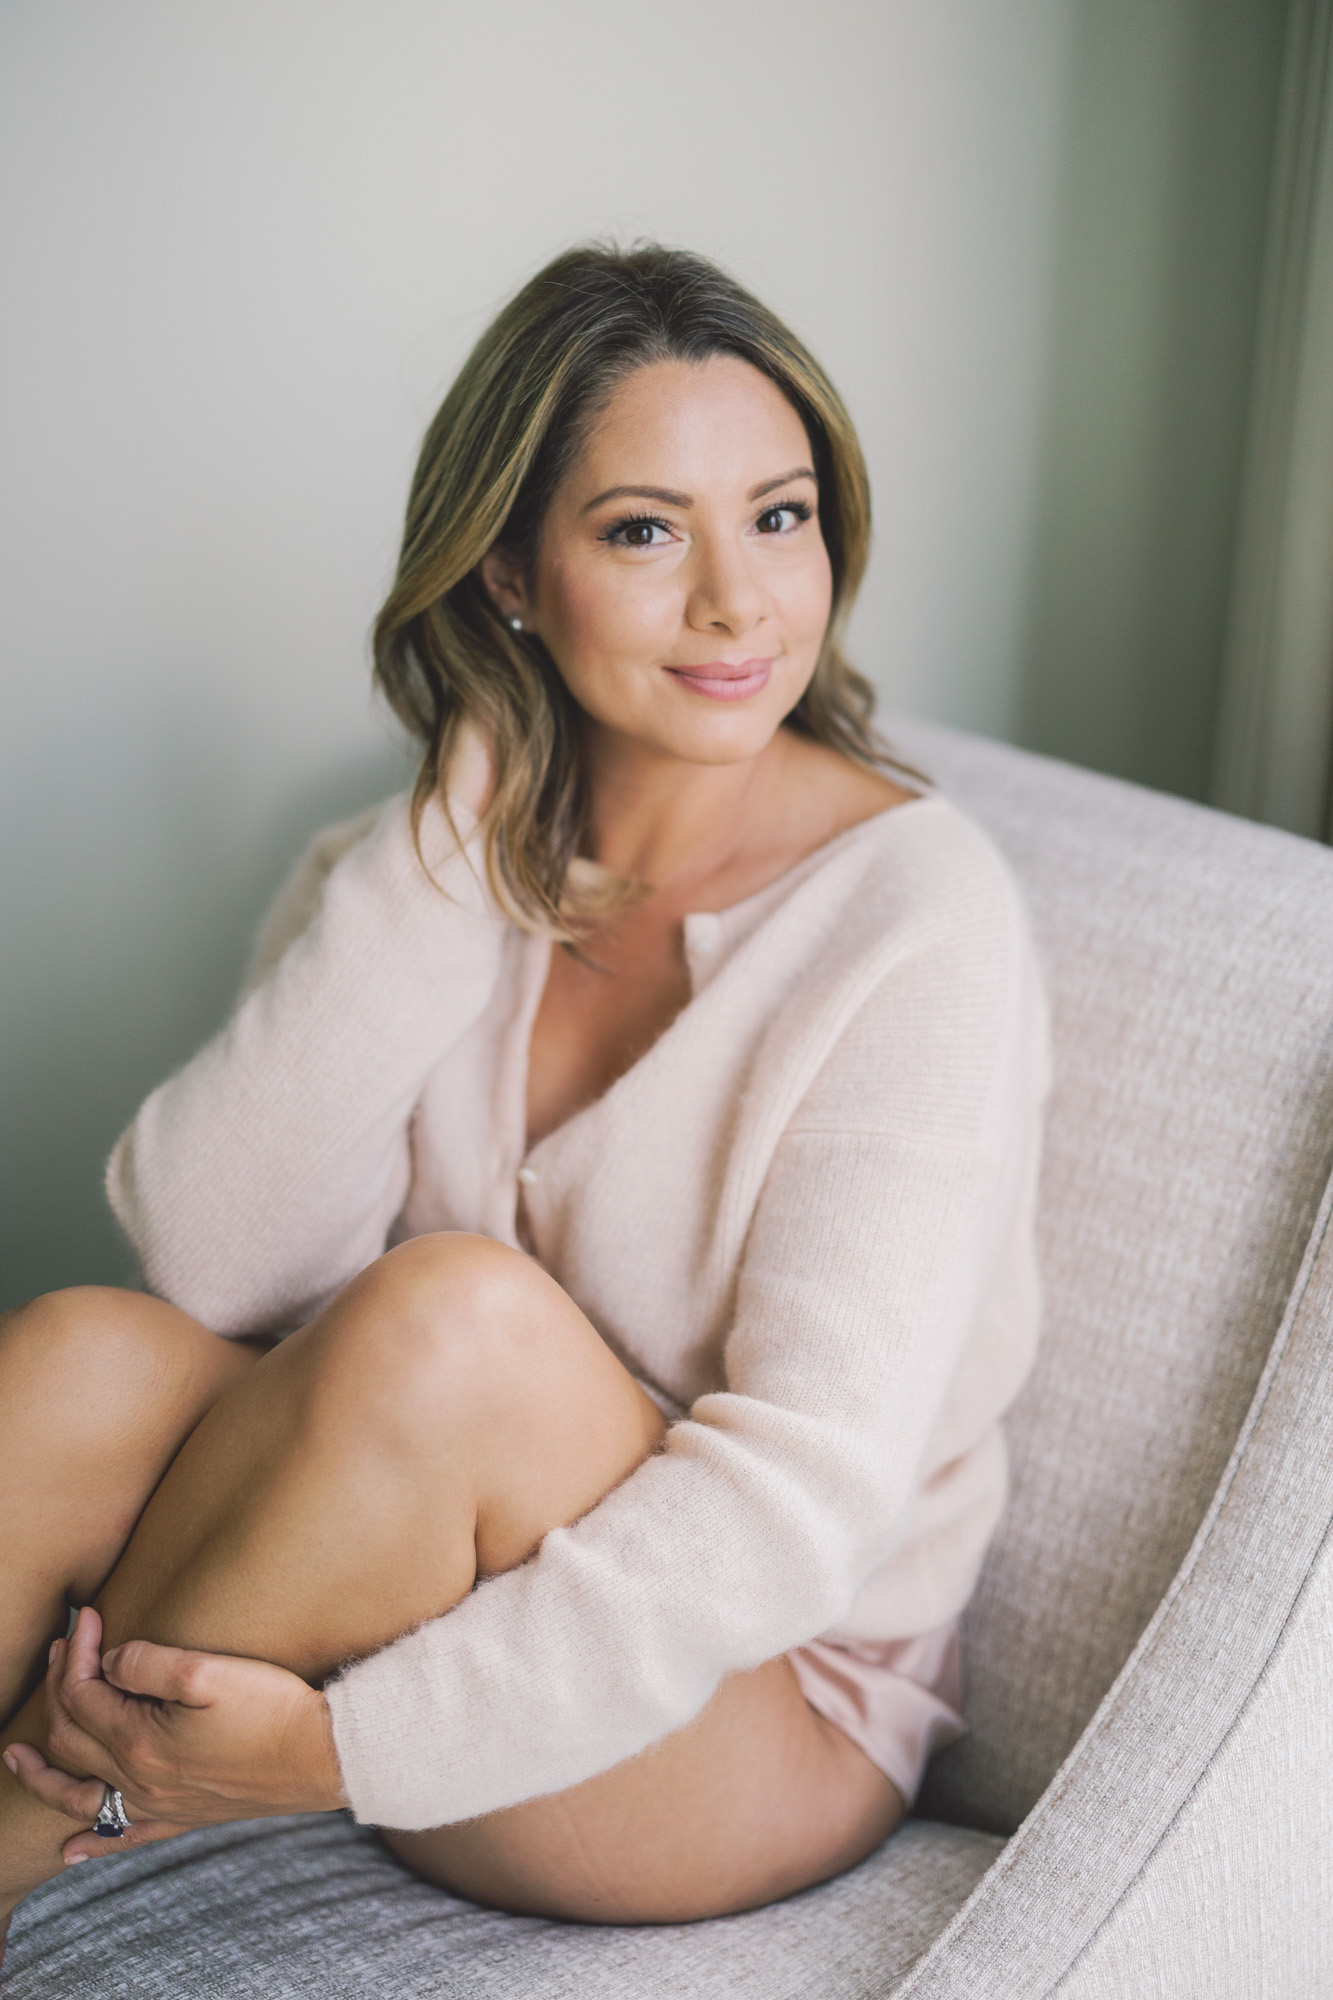 A woman poses for a boudoir photo while wearing a cozy pastel cardigan.